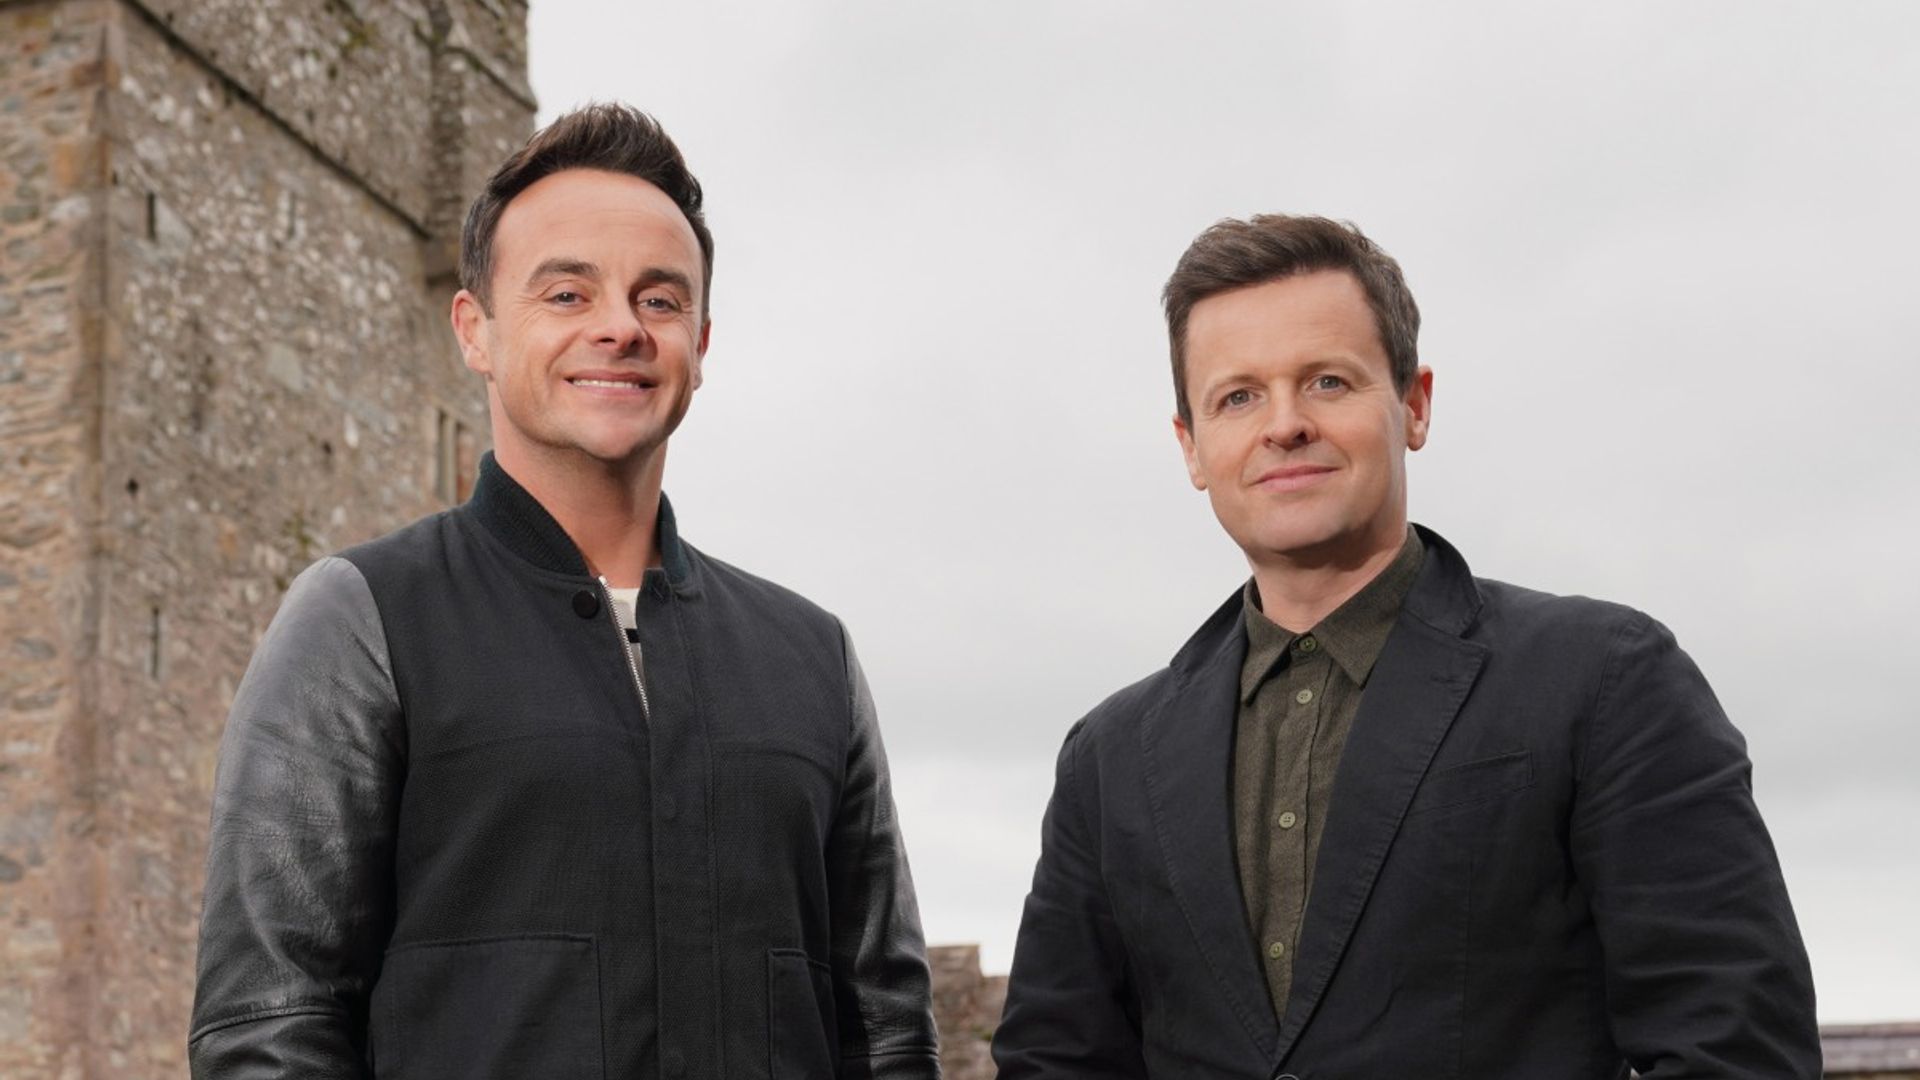 Ant and Dec are actually related - find out how